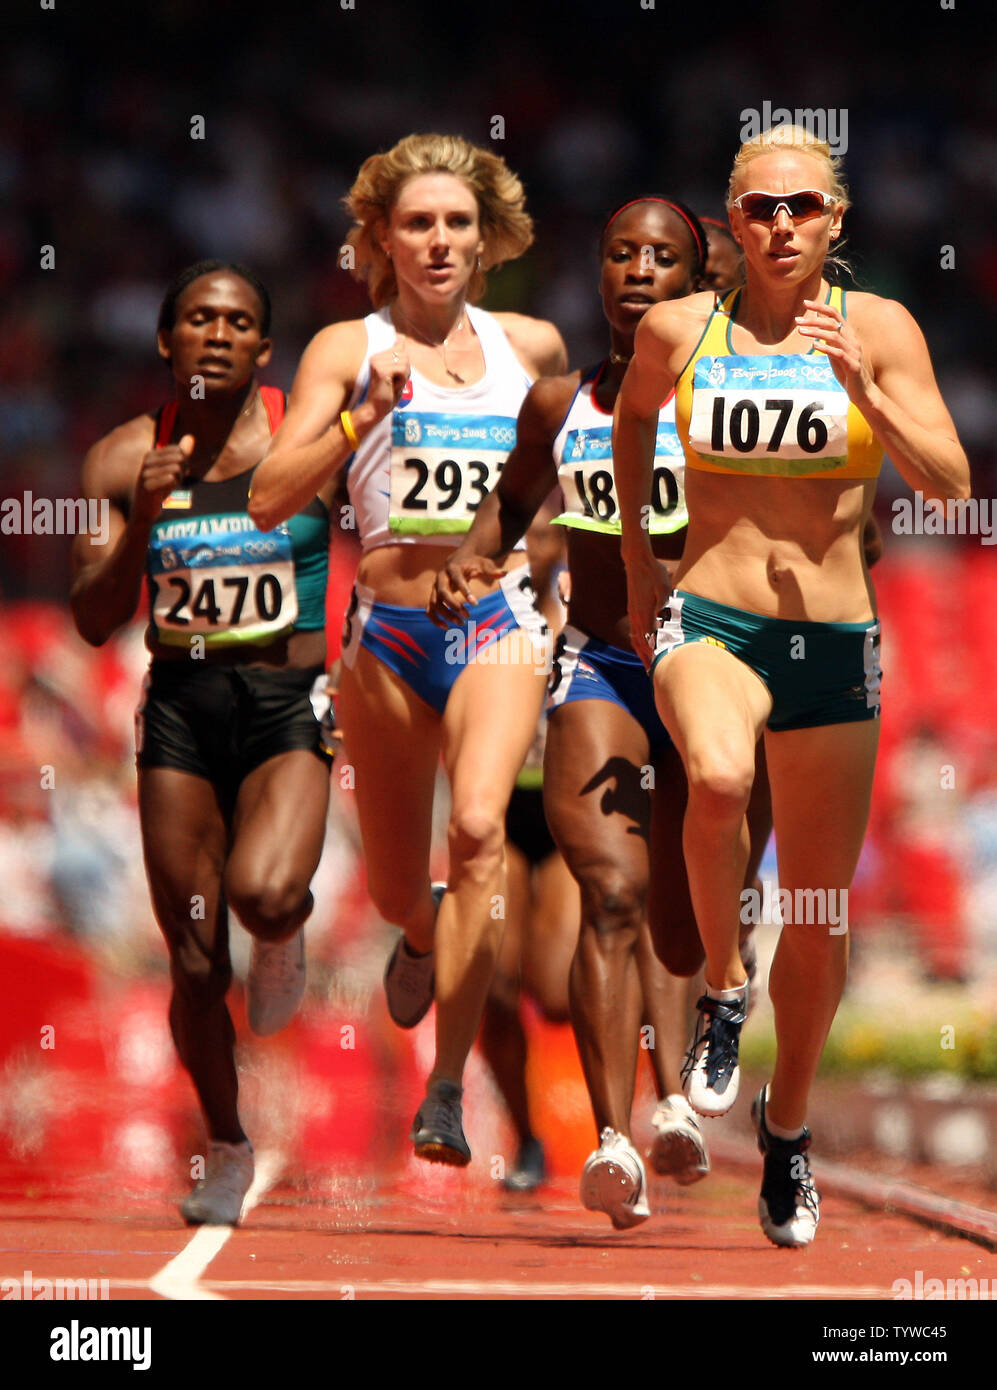 (R-L)  Australia's Tamsyn Lewis leads Britain's Marilyn Okoro, Slovakia's Lucia Klocova and Mozambique's Maria Mutola after the first lap in the Olympic women's 800m round one heats in Beijing August 15, 2008.  Mutola won the heat with a time of 1:58.91.  (UPI Photo/Stephen Shaver) Stock Photo